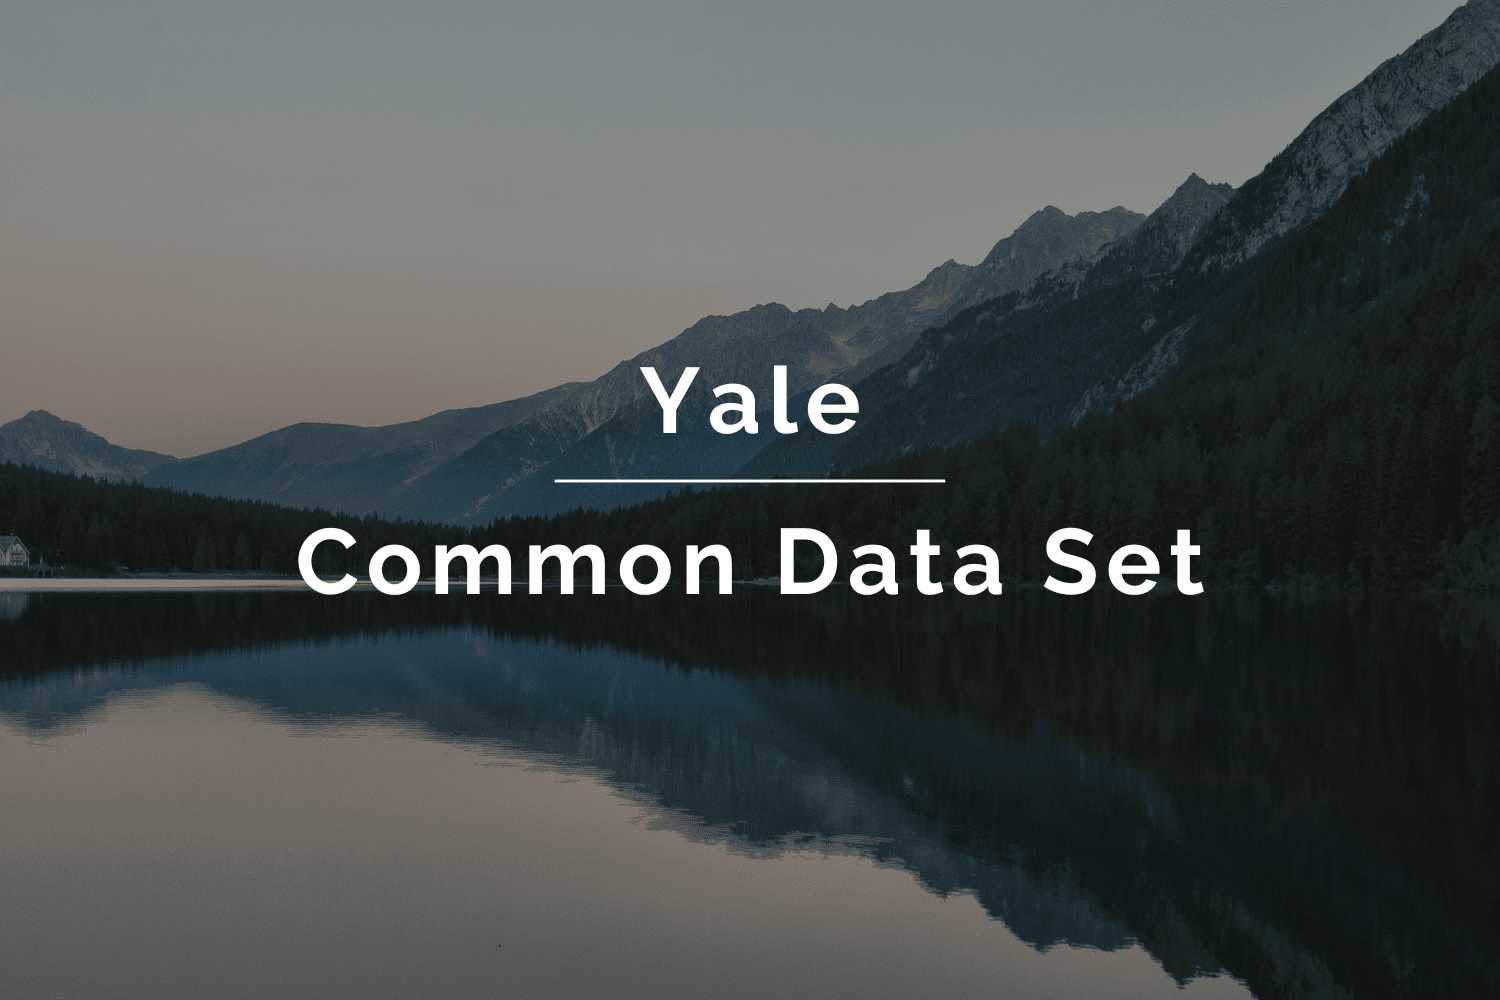 How to Use the Yale Common Data Set